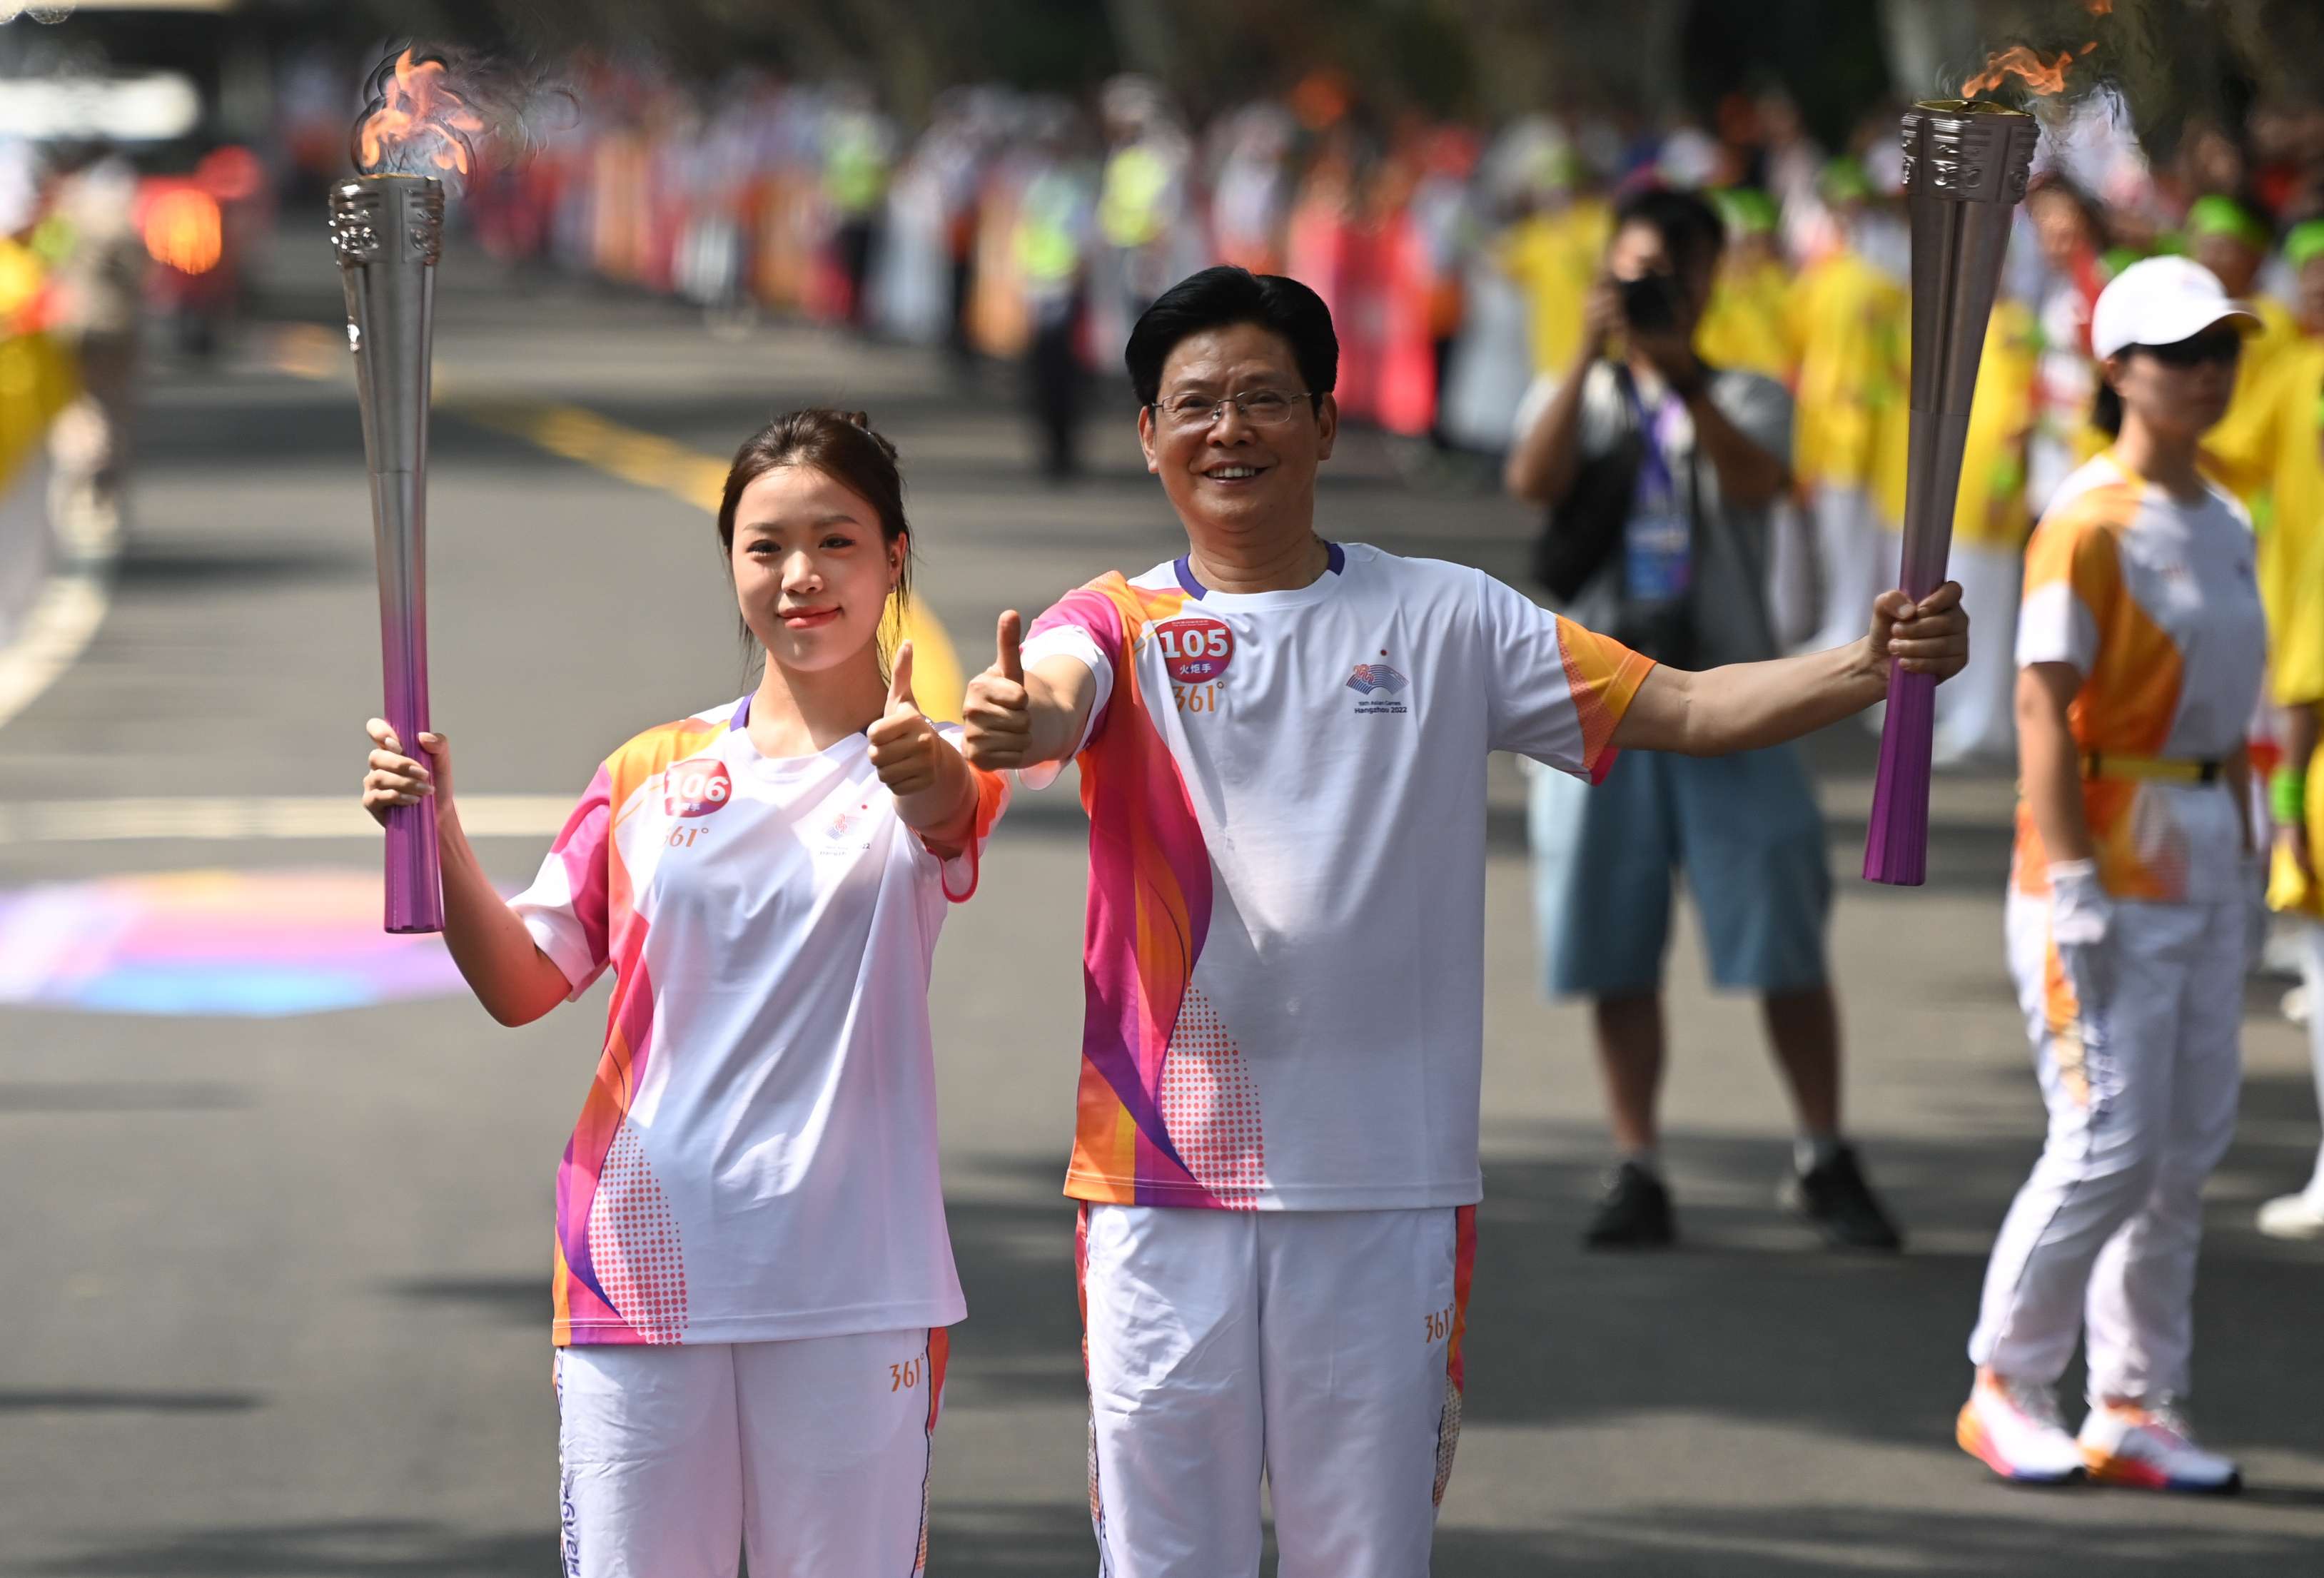 Chasing Light | Legend of the "Fireworks" of the Hangzhou Asian Games